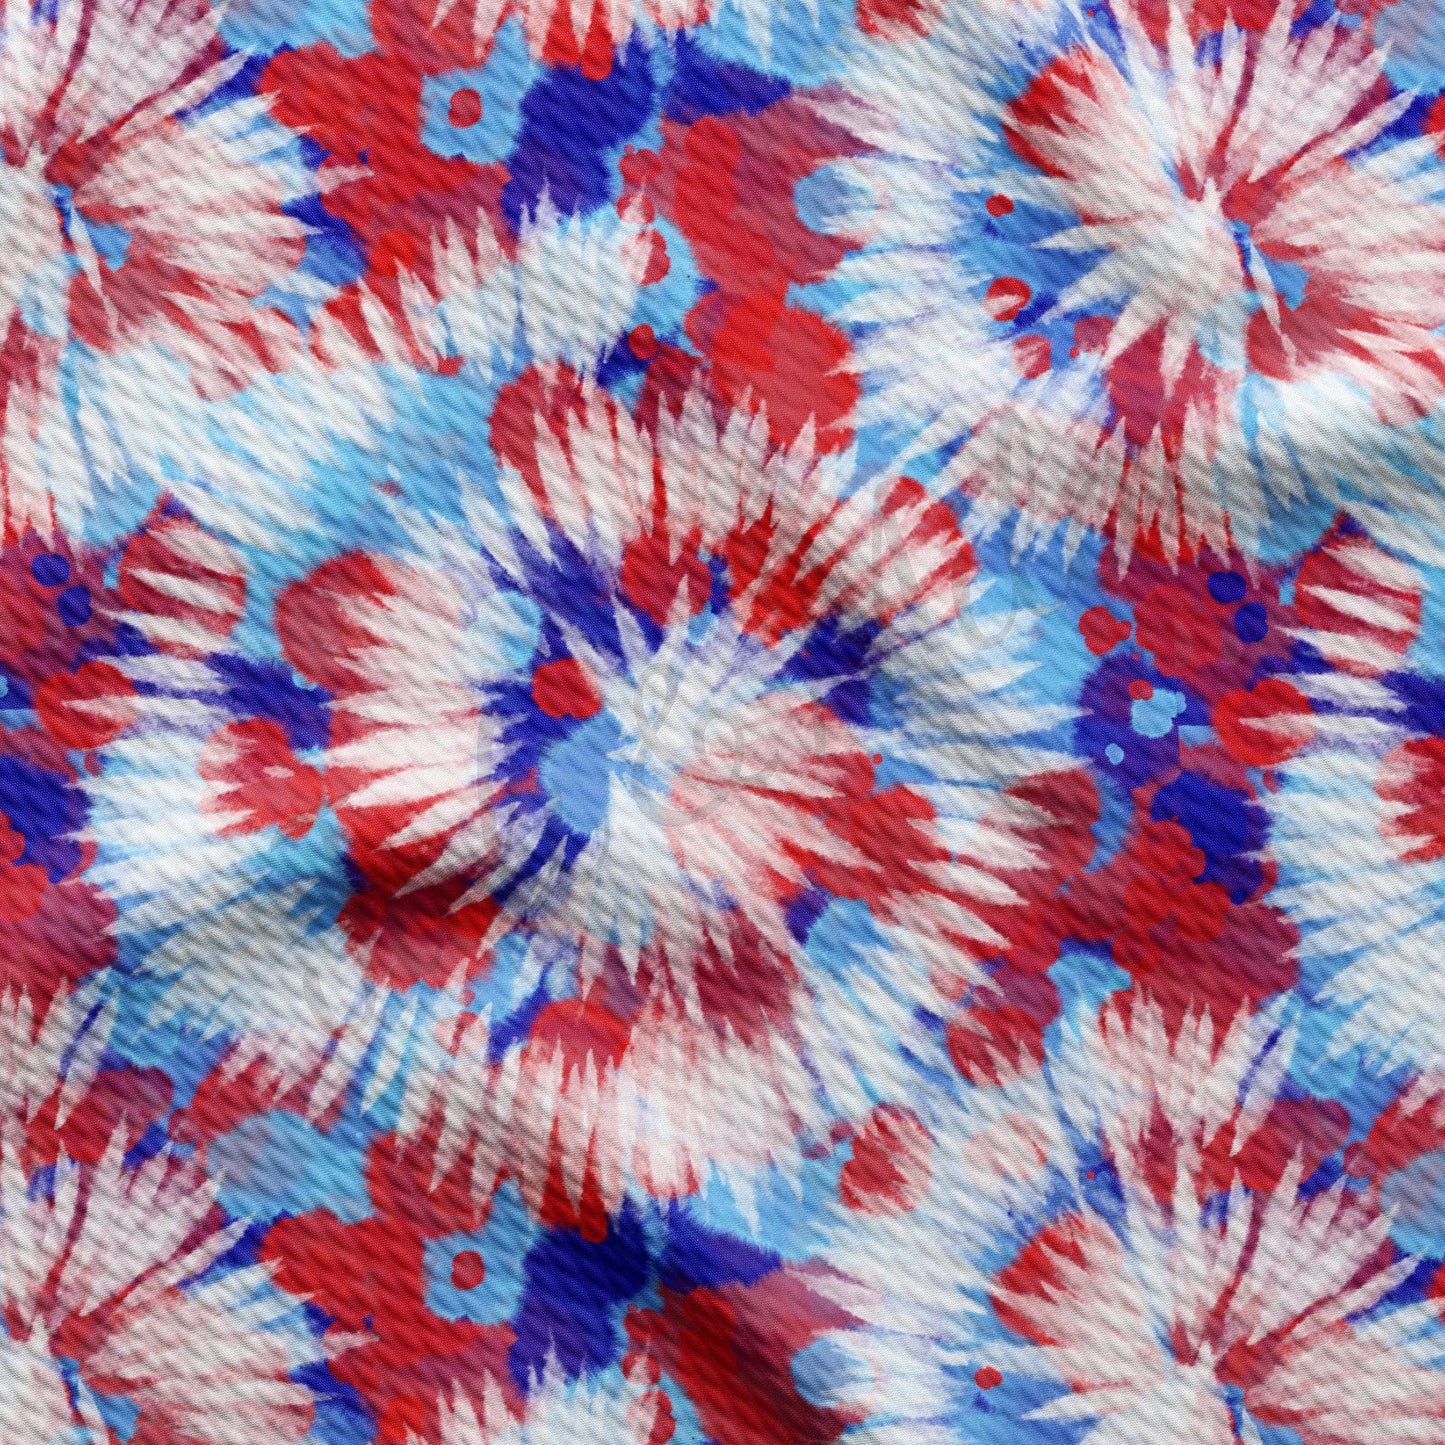 Patriotic 4th of July  Bullet Textured Fabric by the yard AA1612